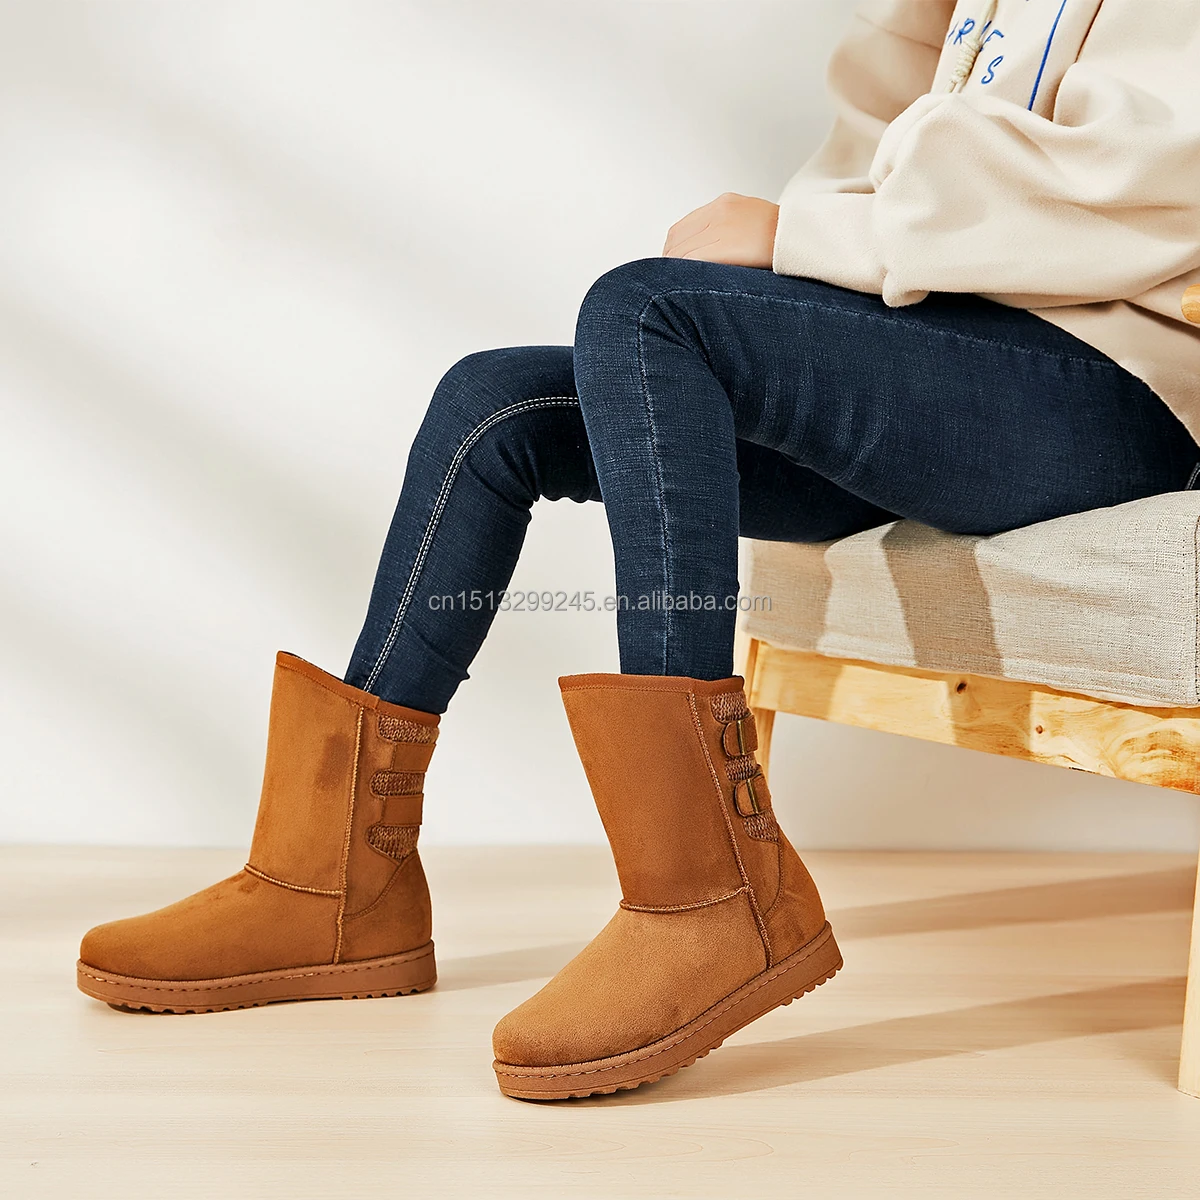 Custom women boots comfortable warm fashion female winter boots shoes for ladies